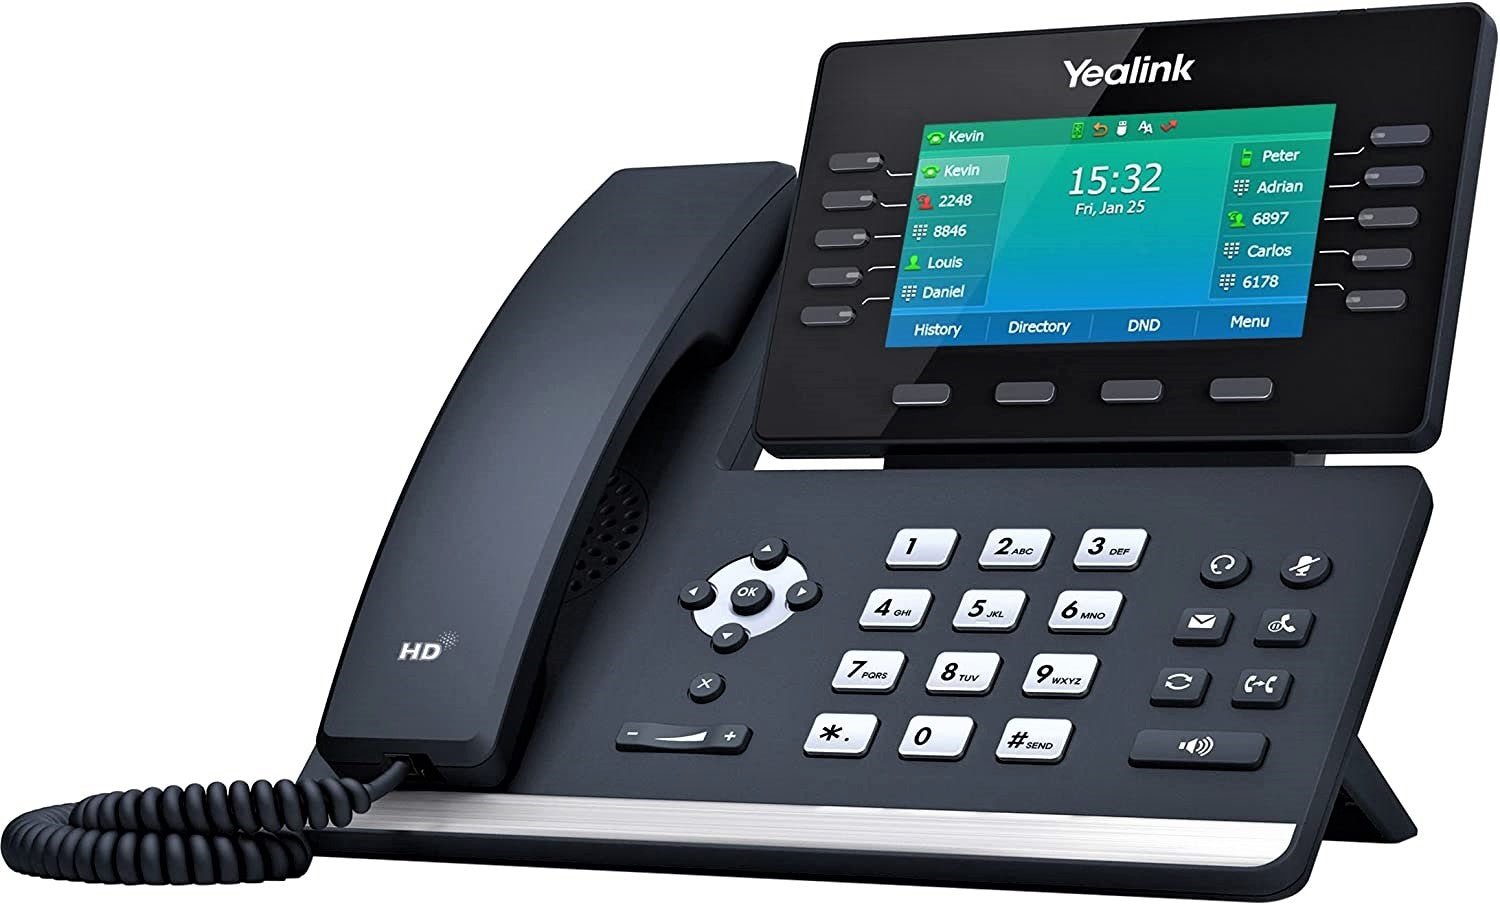 Yealink T54W IP Phone, 16 VoIP Accounts. 4.3-Inch Color Display, AC Wi-Fi, Dual-Port Gigabit Ethernet, PoE, Power Adapter Not Included (SIP-T54W)